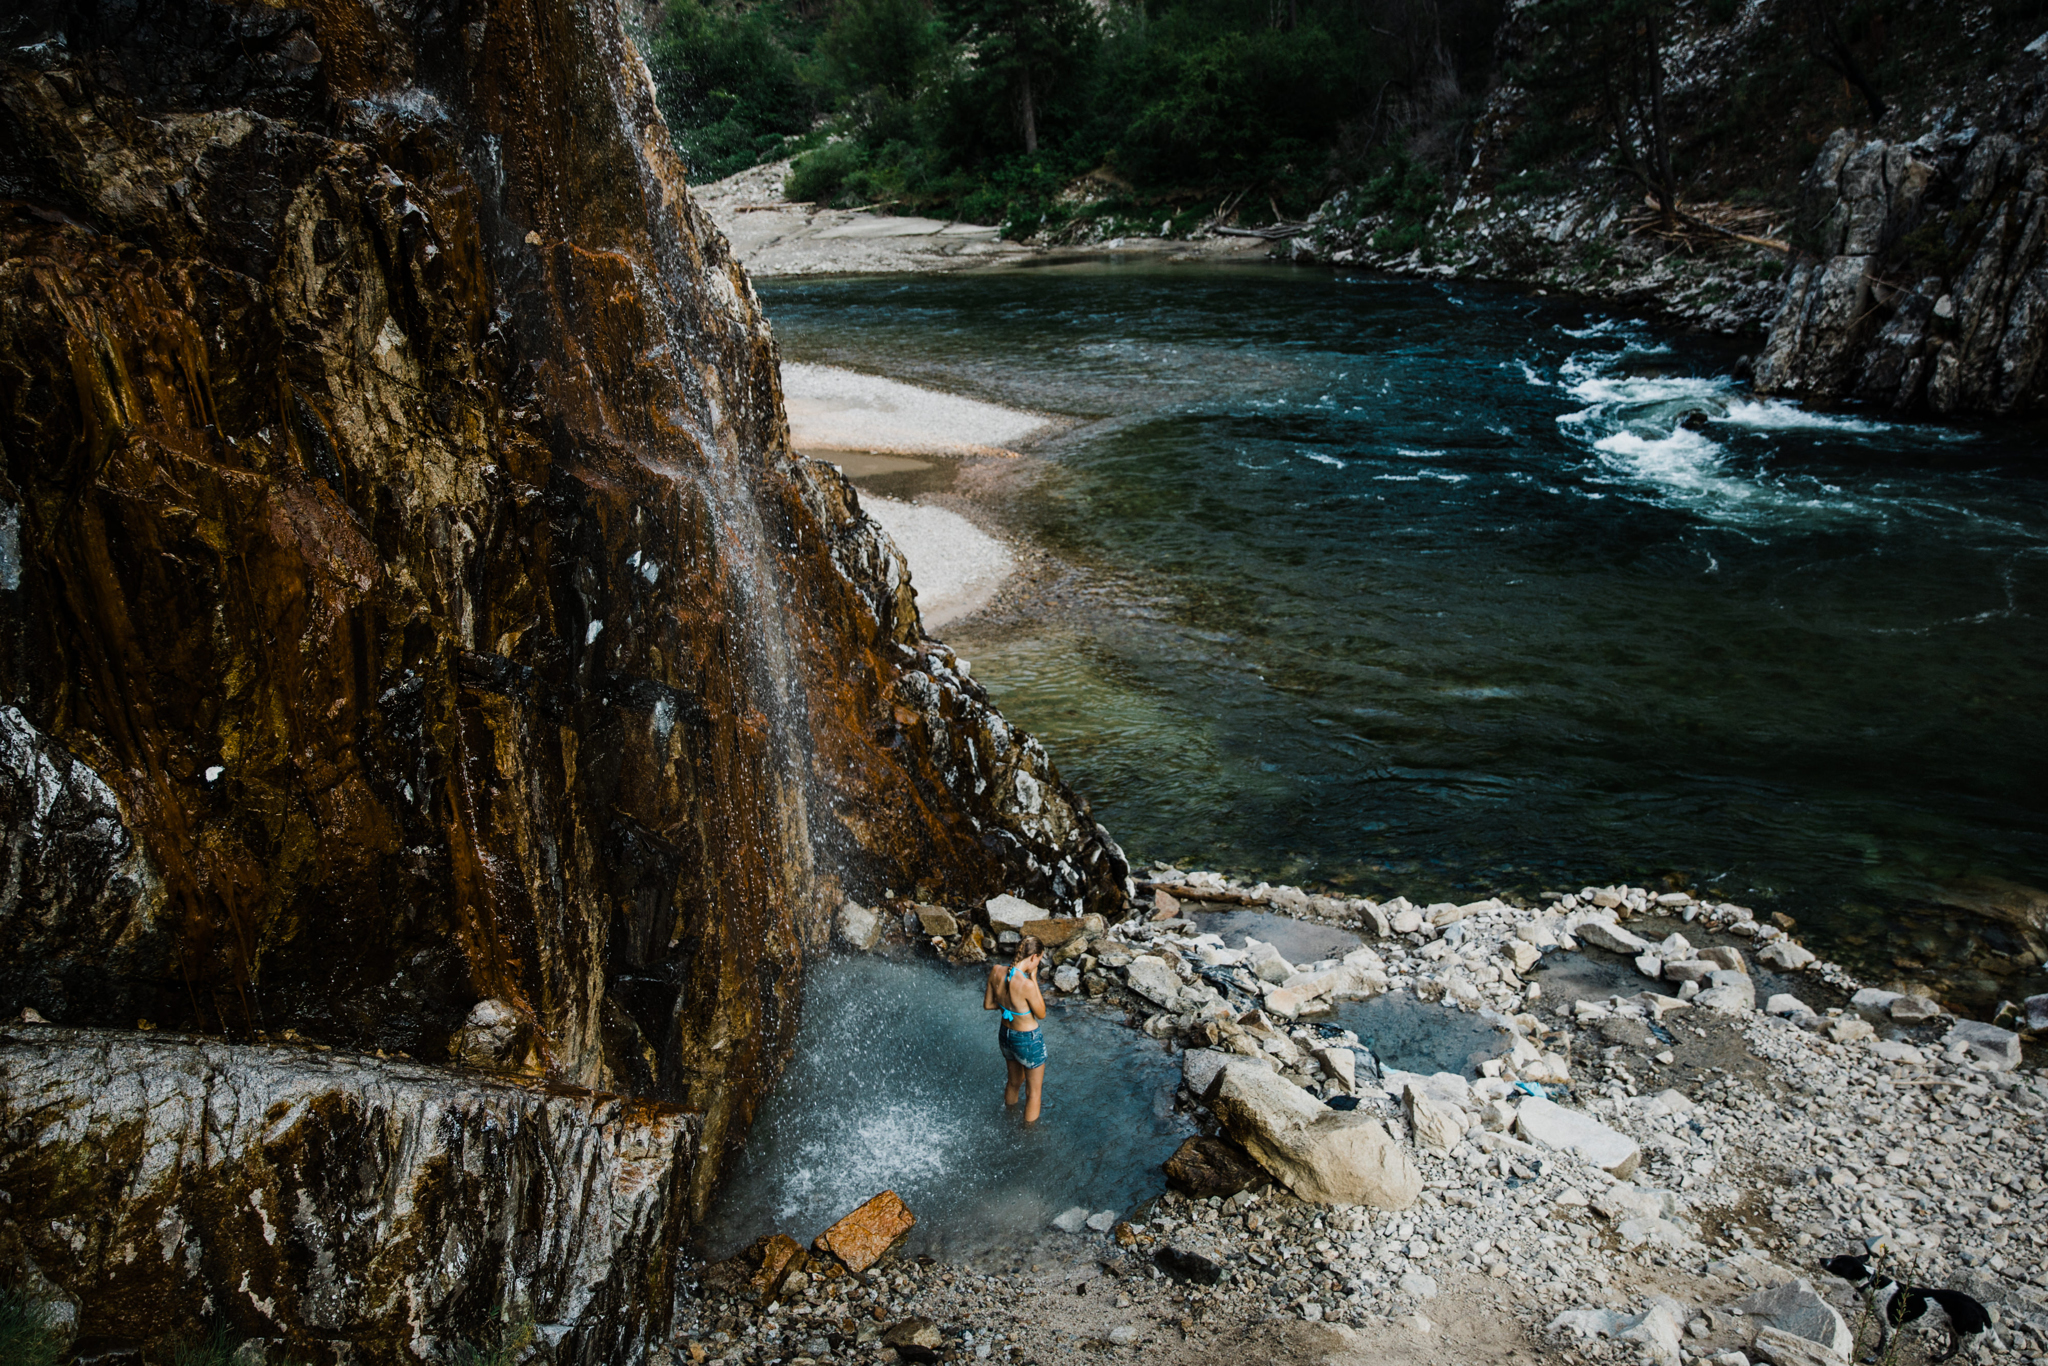 hot springs | utah and california adventure elopement photographers | the hearnes adventure photography | www.thehearnes.com